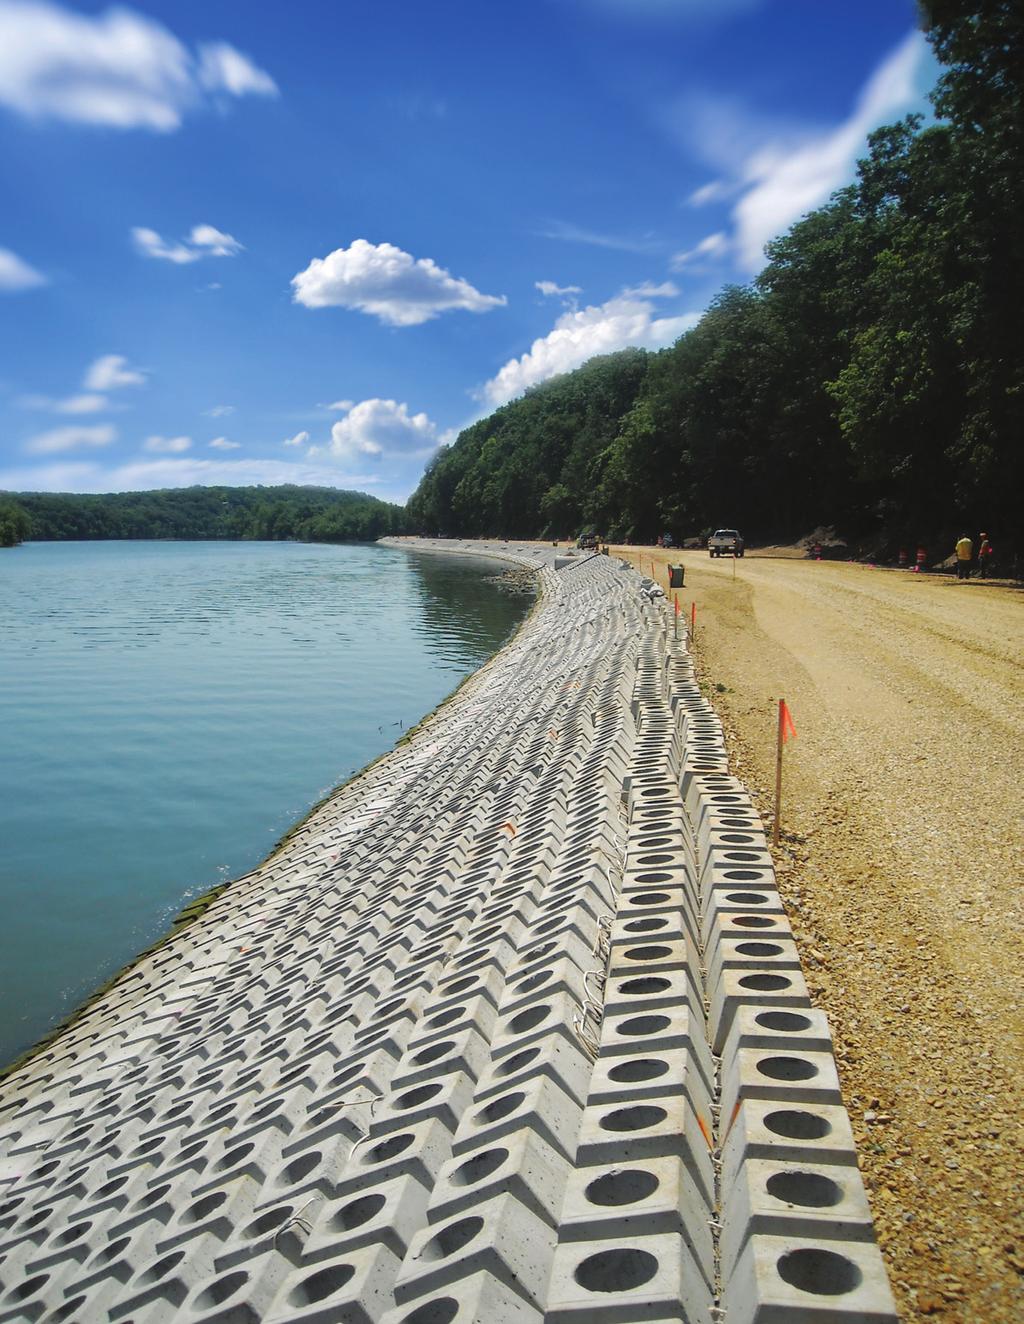 Our Concrete Mats Can be Used for Multiple Applications SHORELINE PROTECTION: Cable Concrete stabilization increases the shoreline and bank resistance to erosive forces and repairing bank failures to